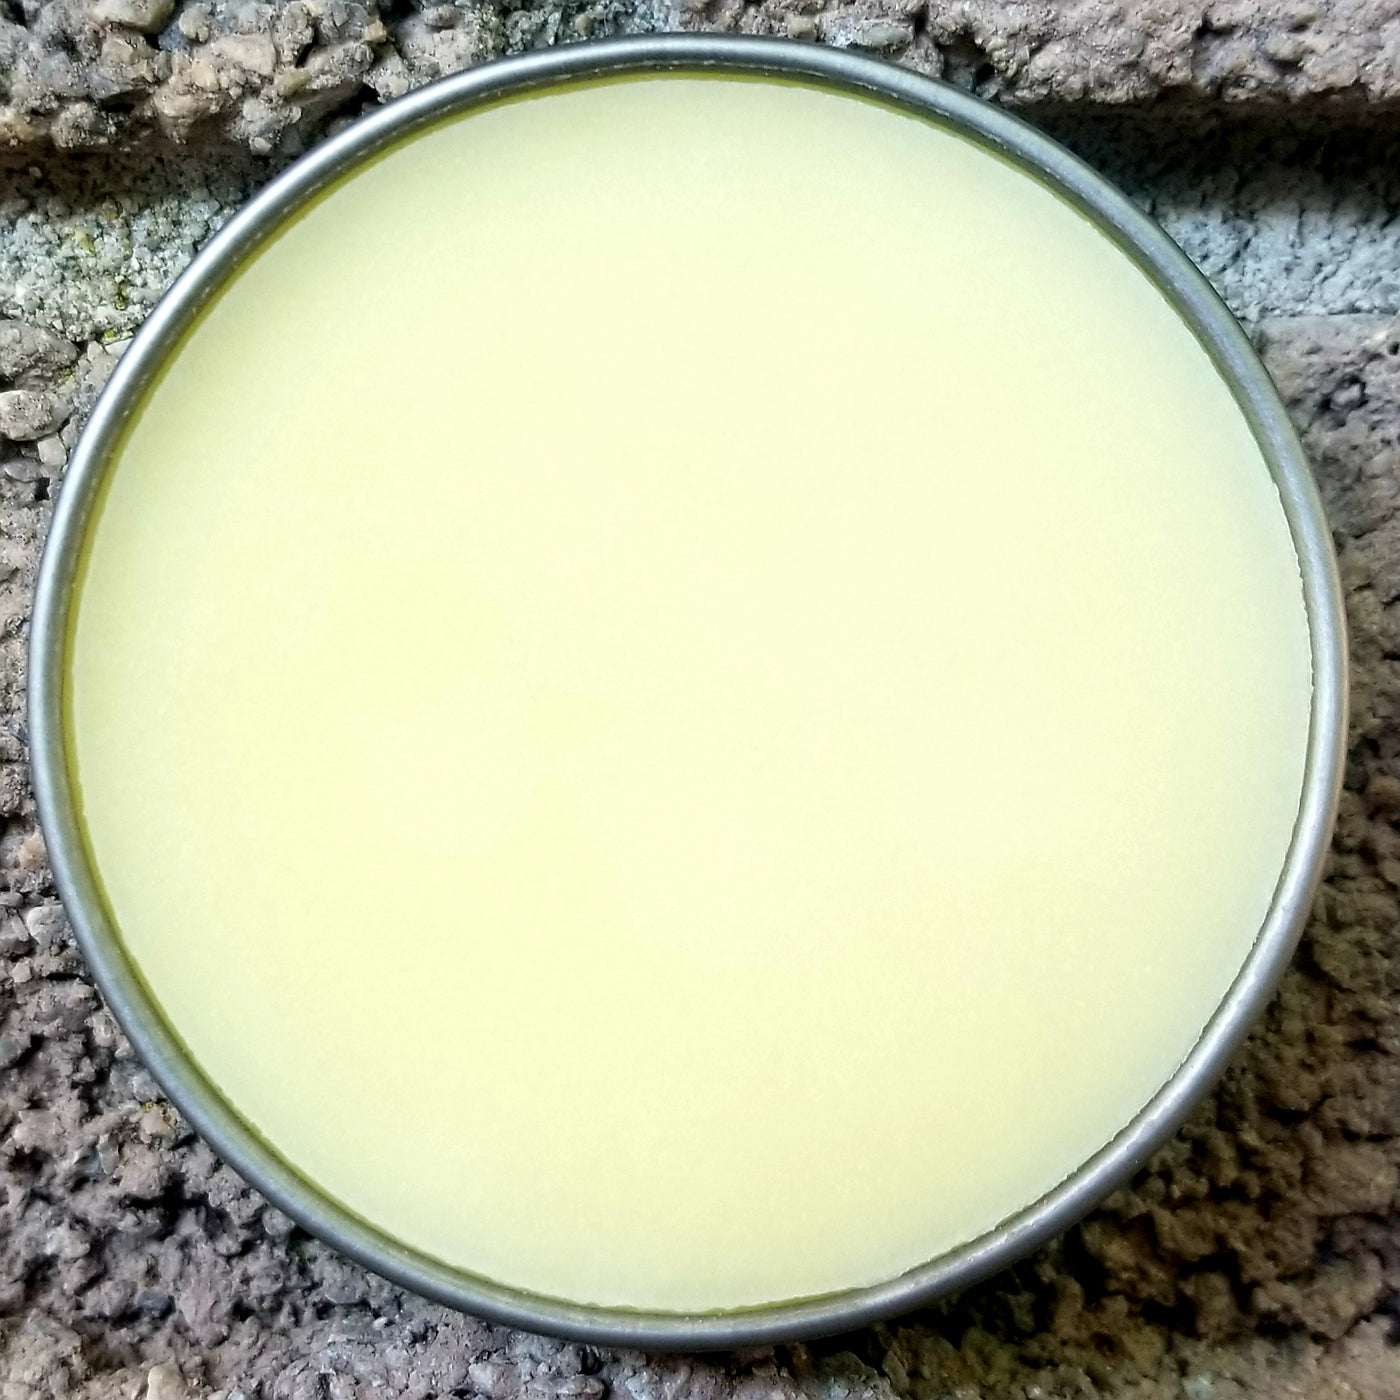 Choice is Yours - Customize your Premium Beard Butter